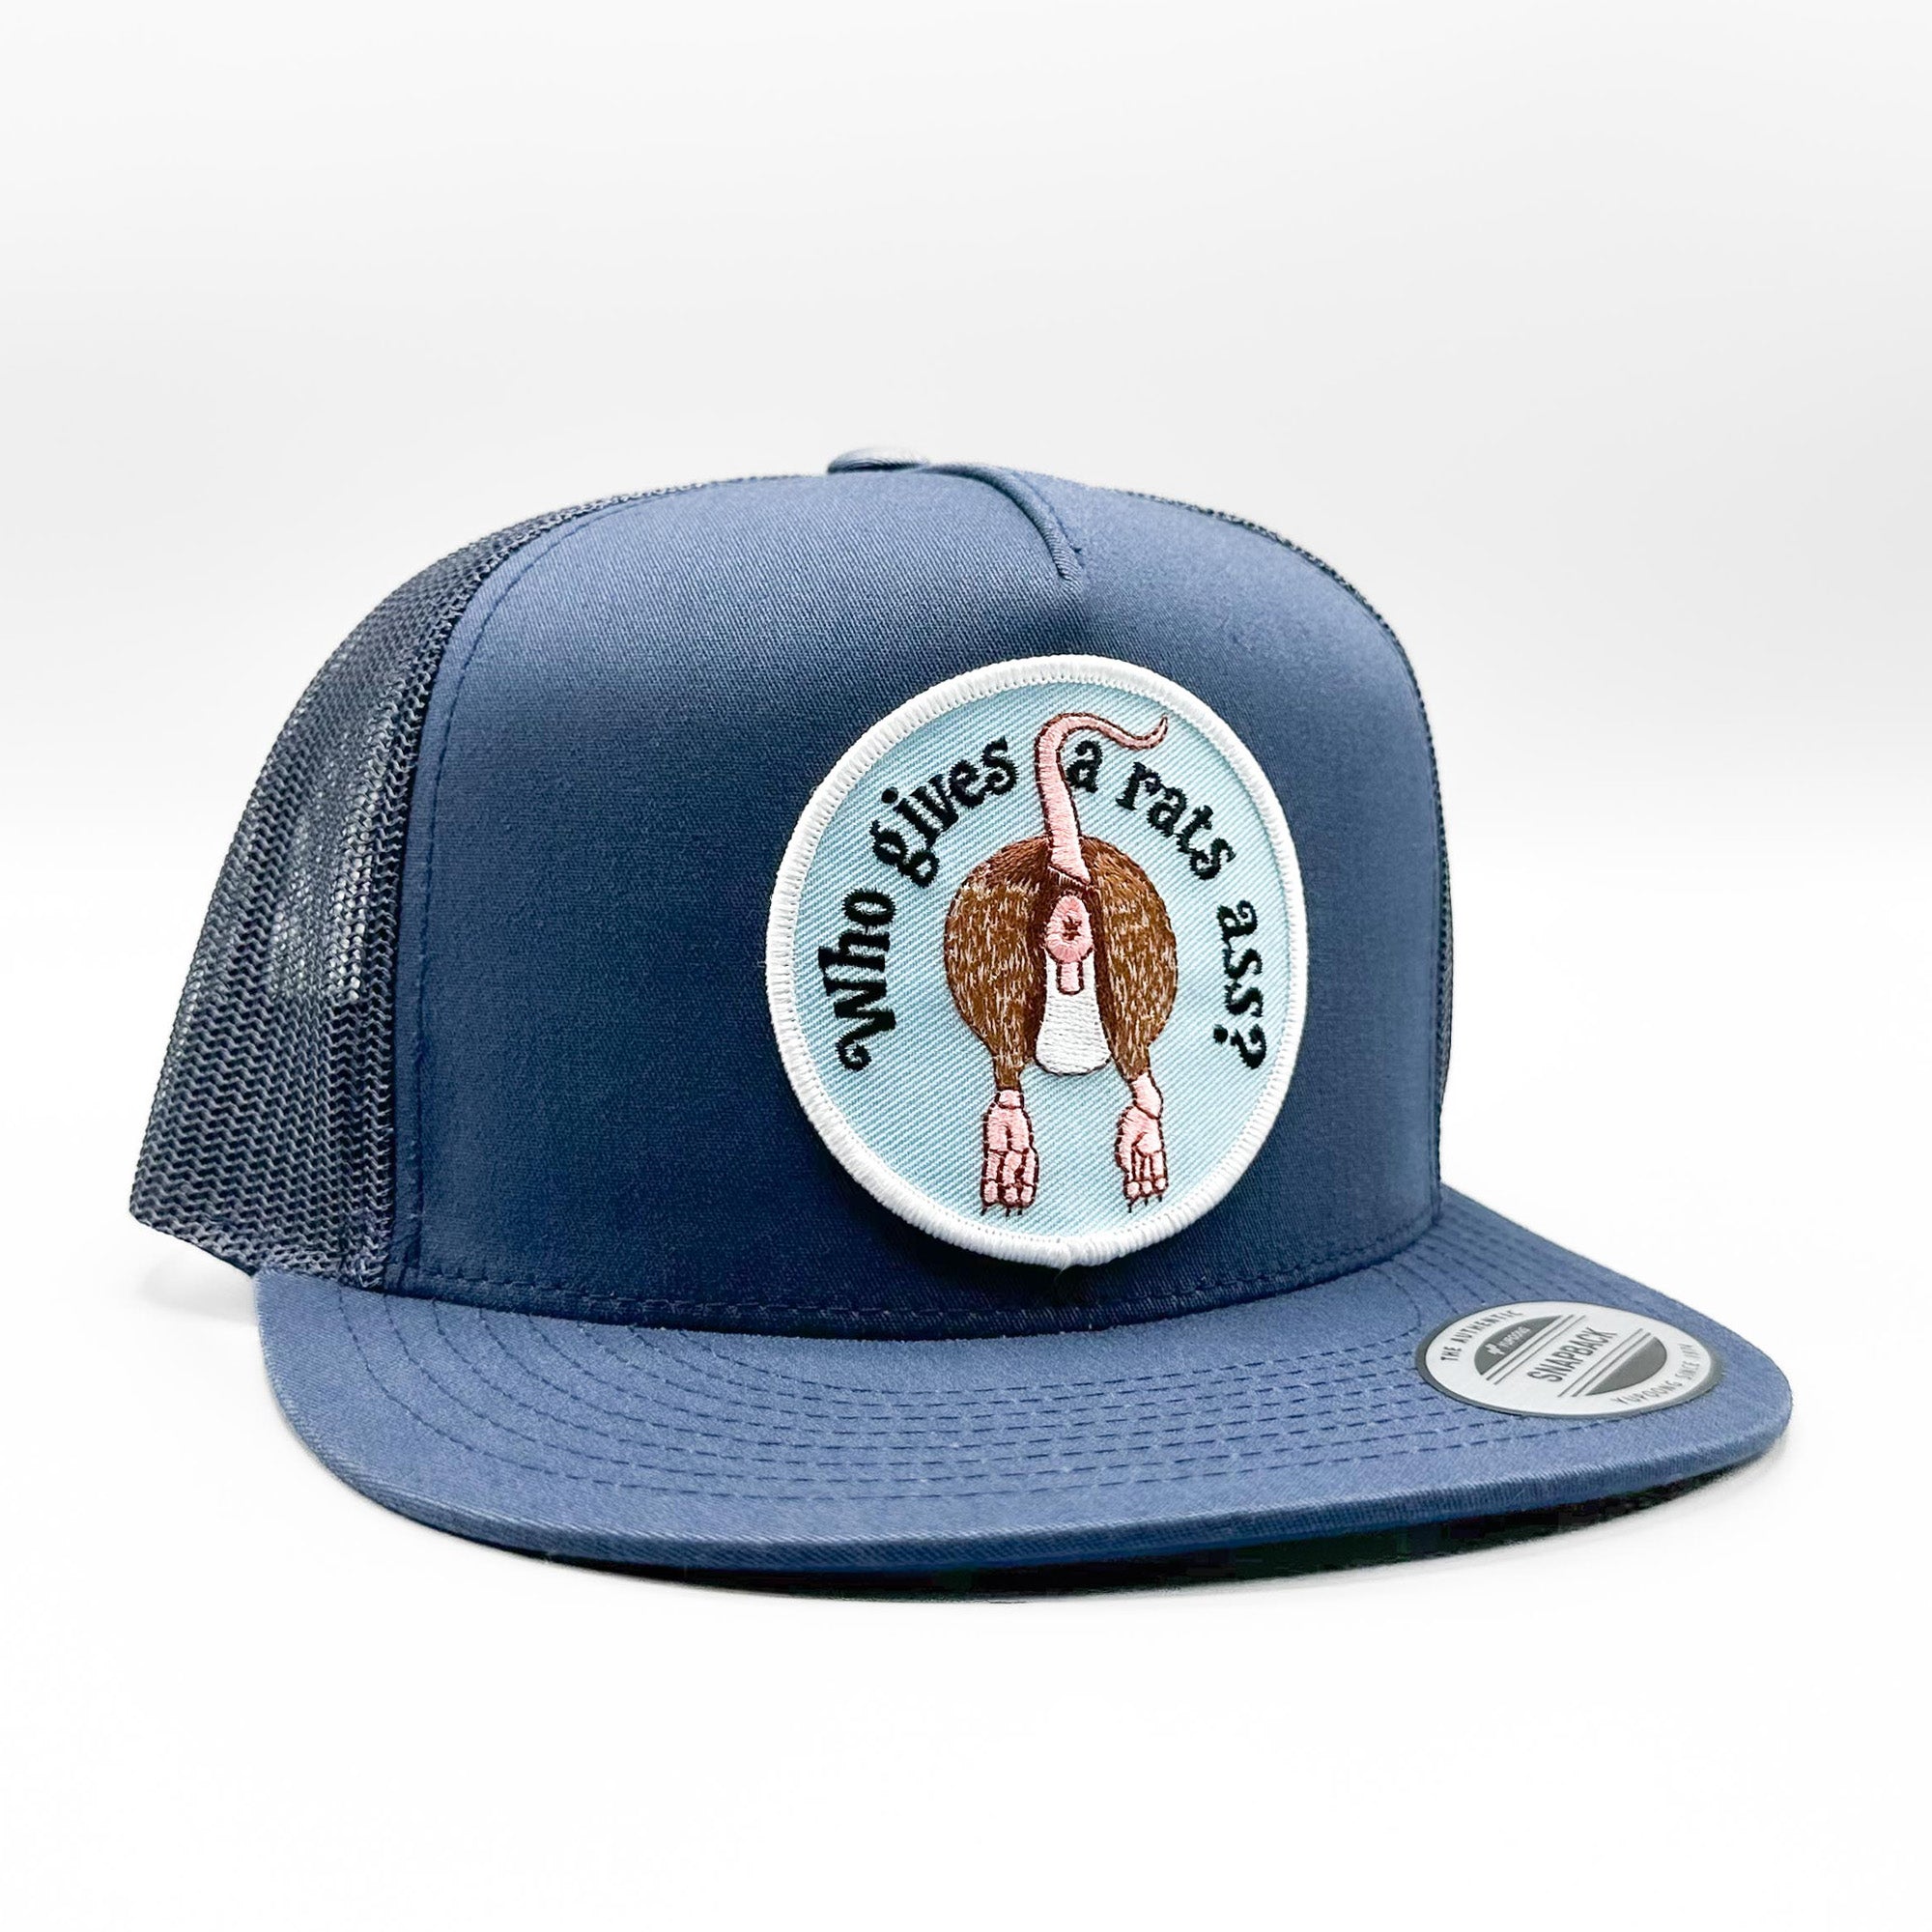 Who Gives a Rat's Ass Funny Trucker Hat, Retro Rat Patch Yupoong ...